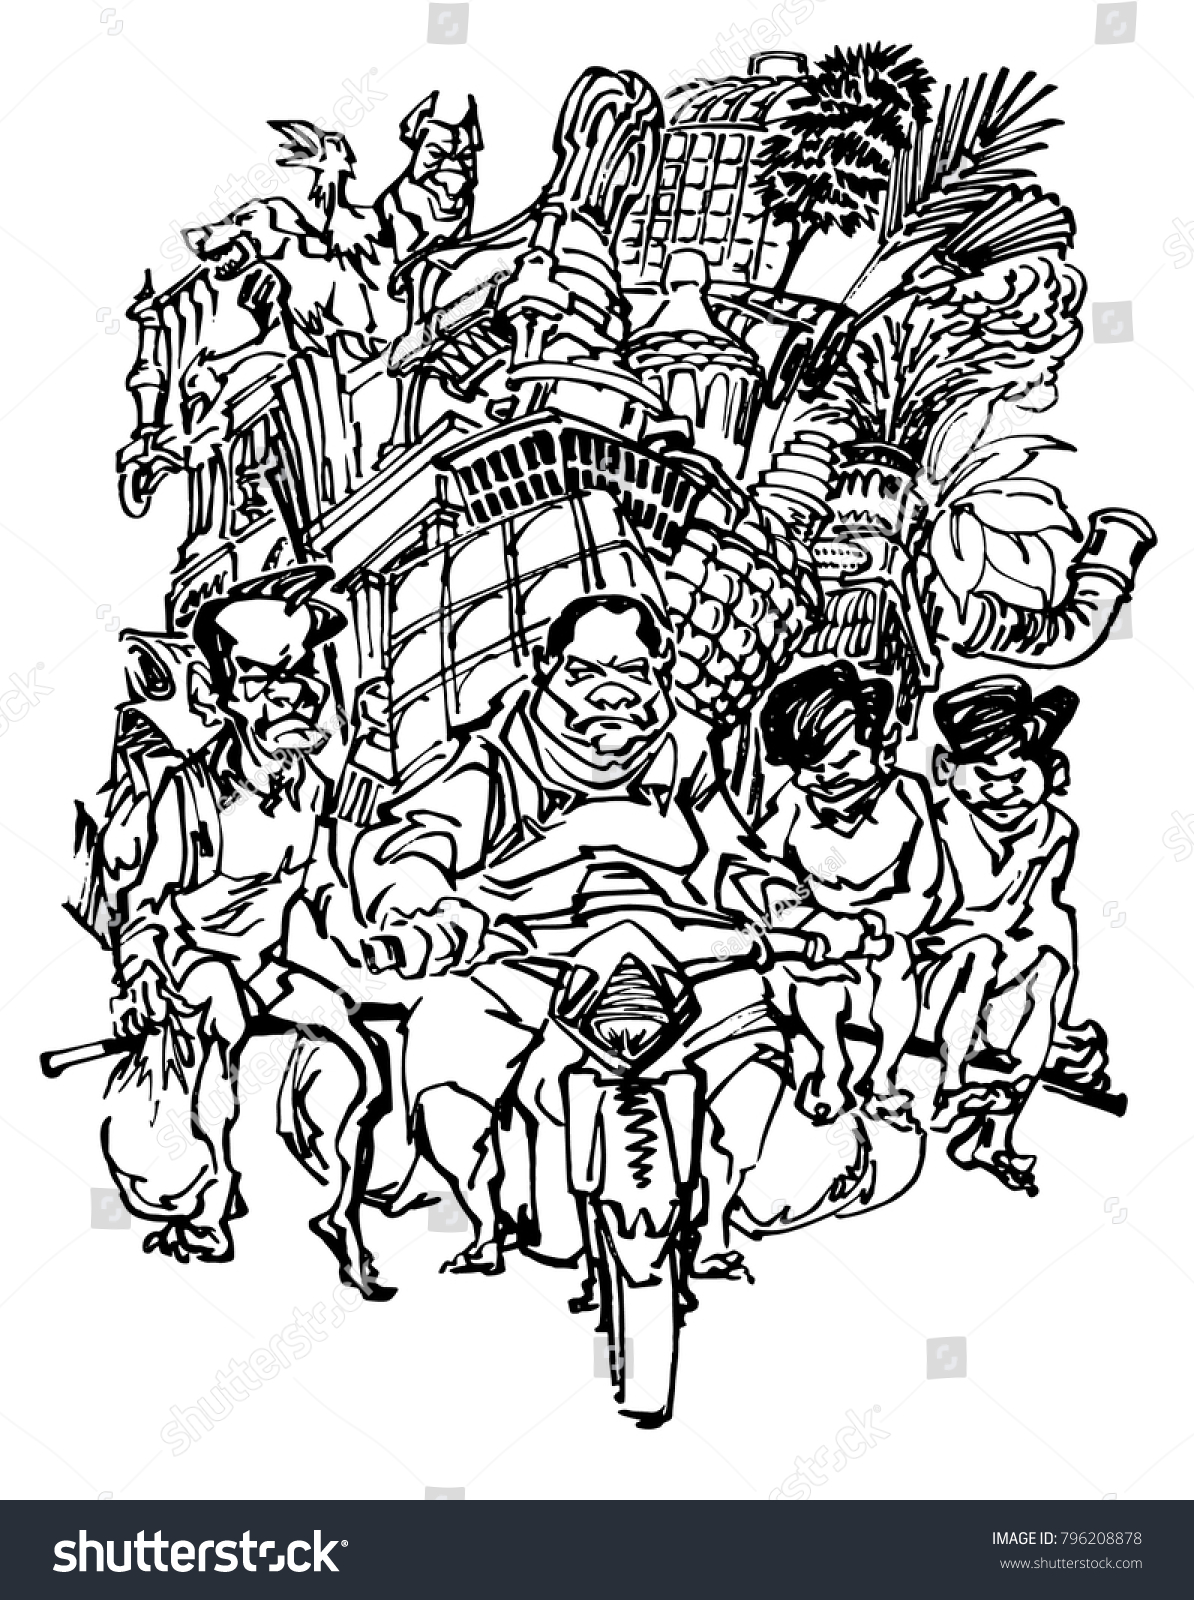 SVG of Vietnamese family packed up on a scooter, humorous illustration svg